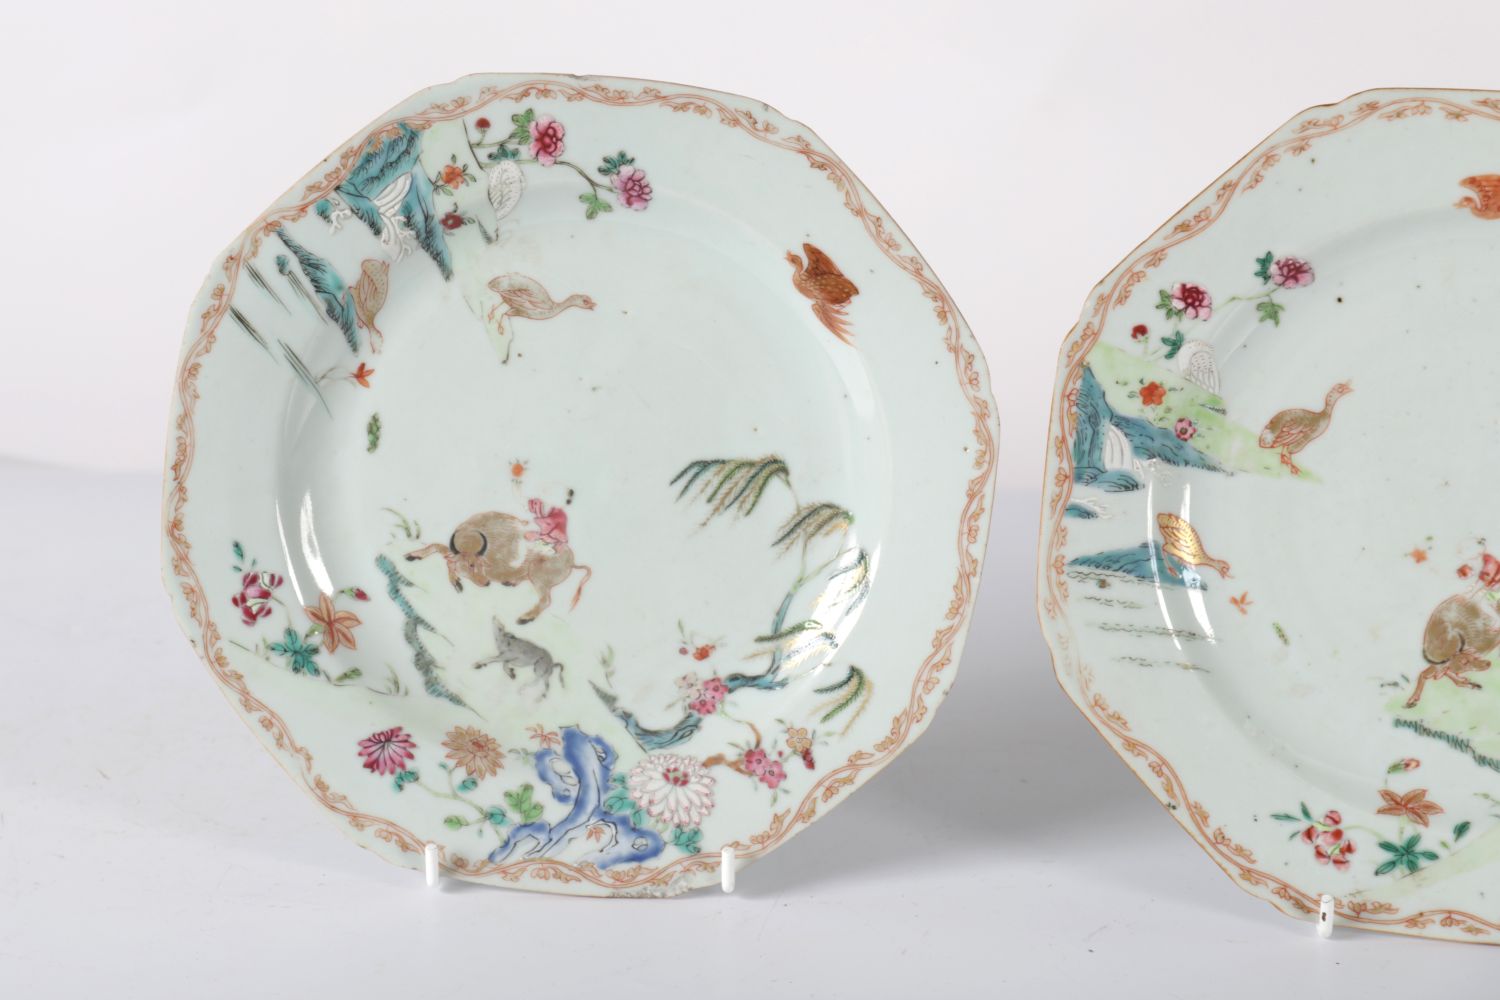 3 18TH-CENTURY CHINESE FAMILLE ROSE PLATES - Image 2 of 3